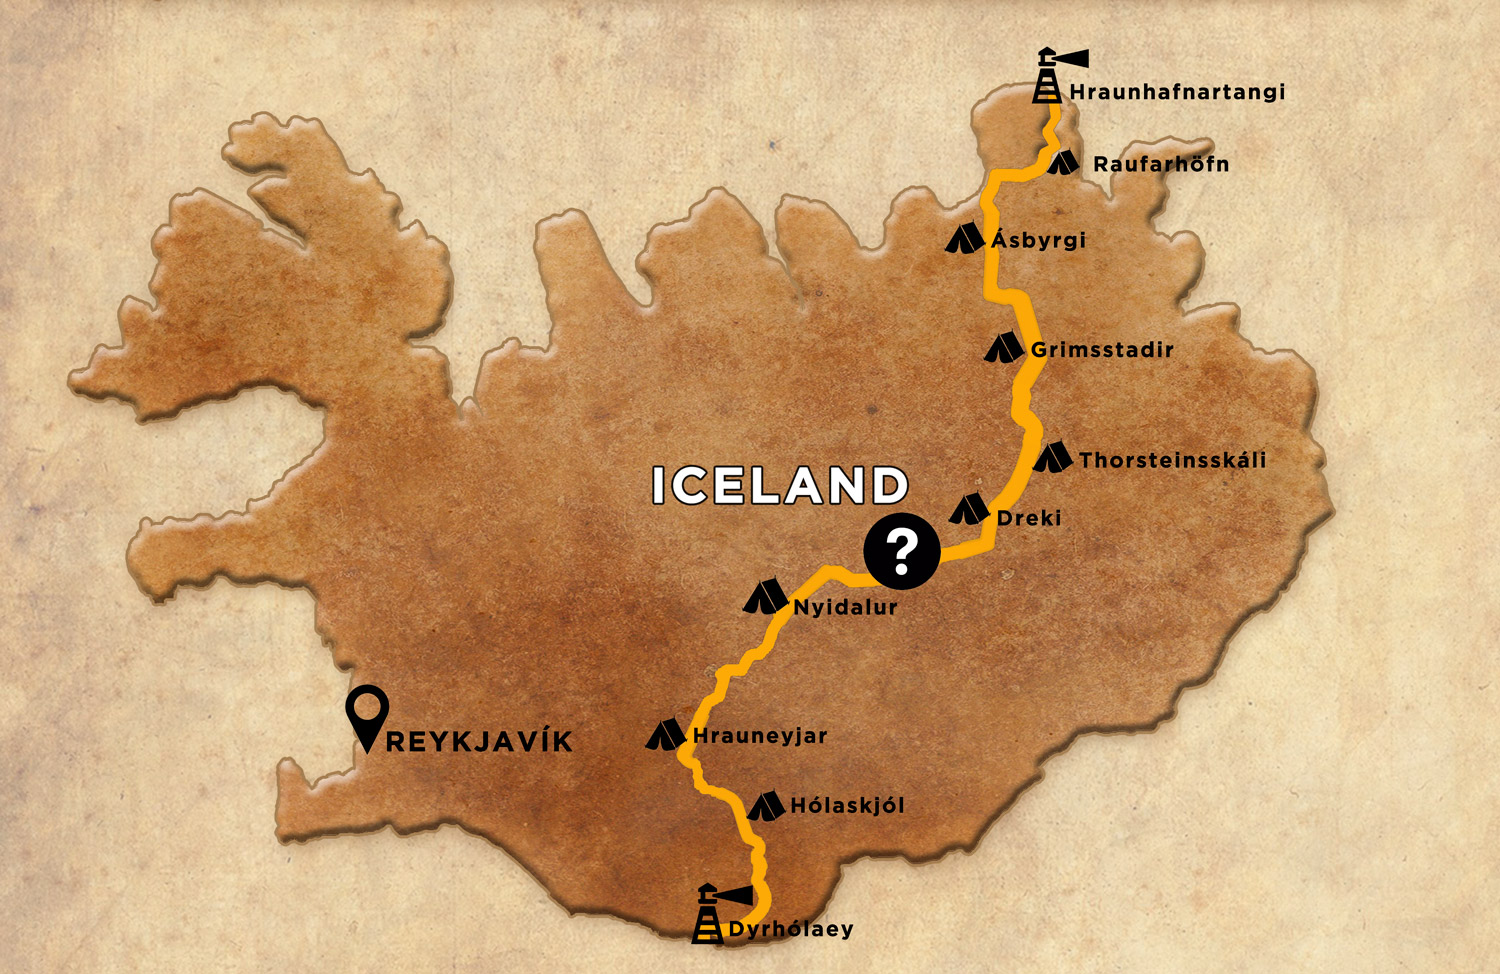 Iceland - The route